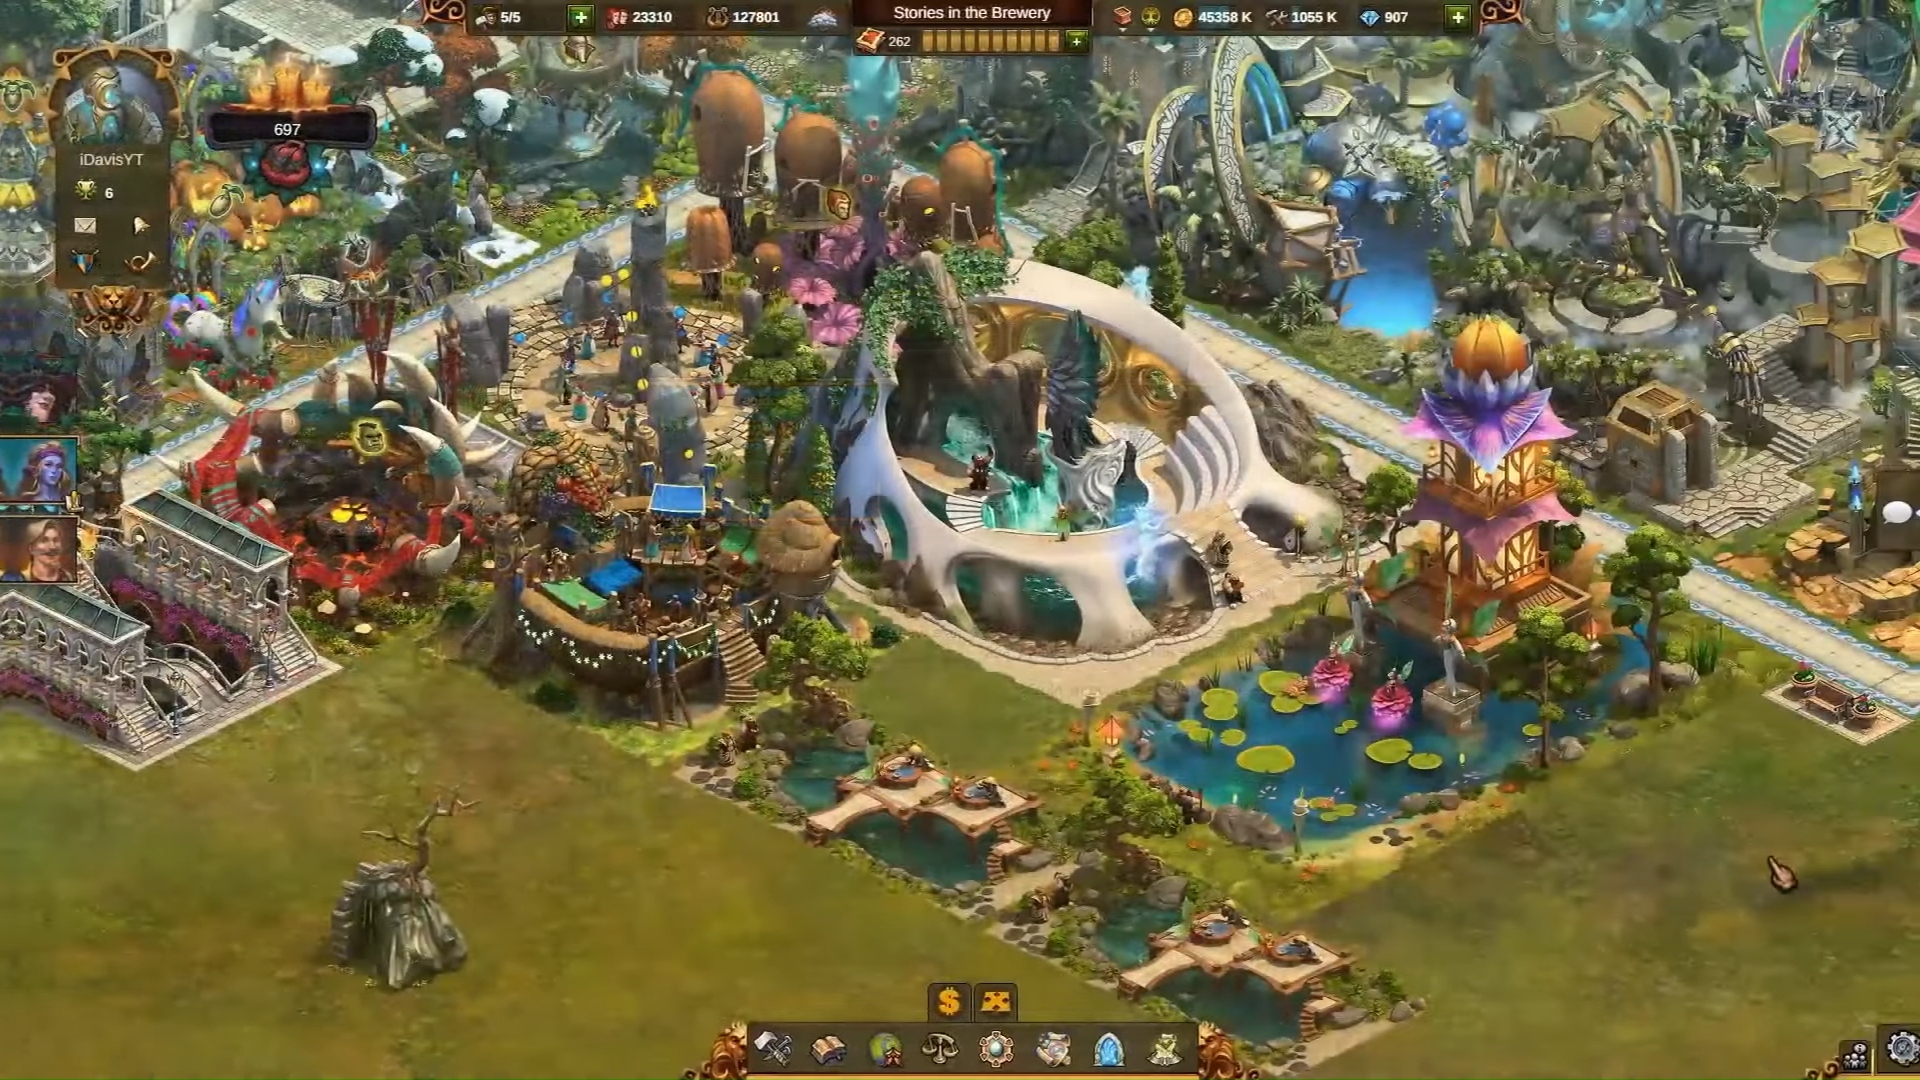 Best PC games for mobile devices: Elvenar.  The screenshot shows a primeval fantasy city from an isometric perspective.